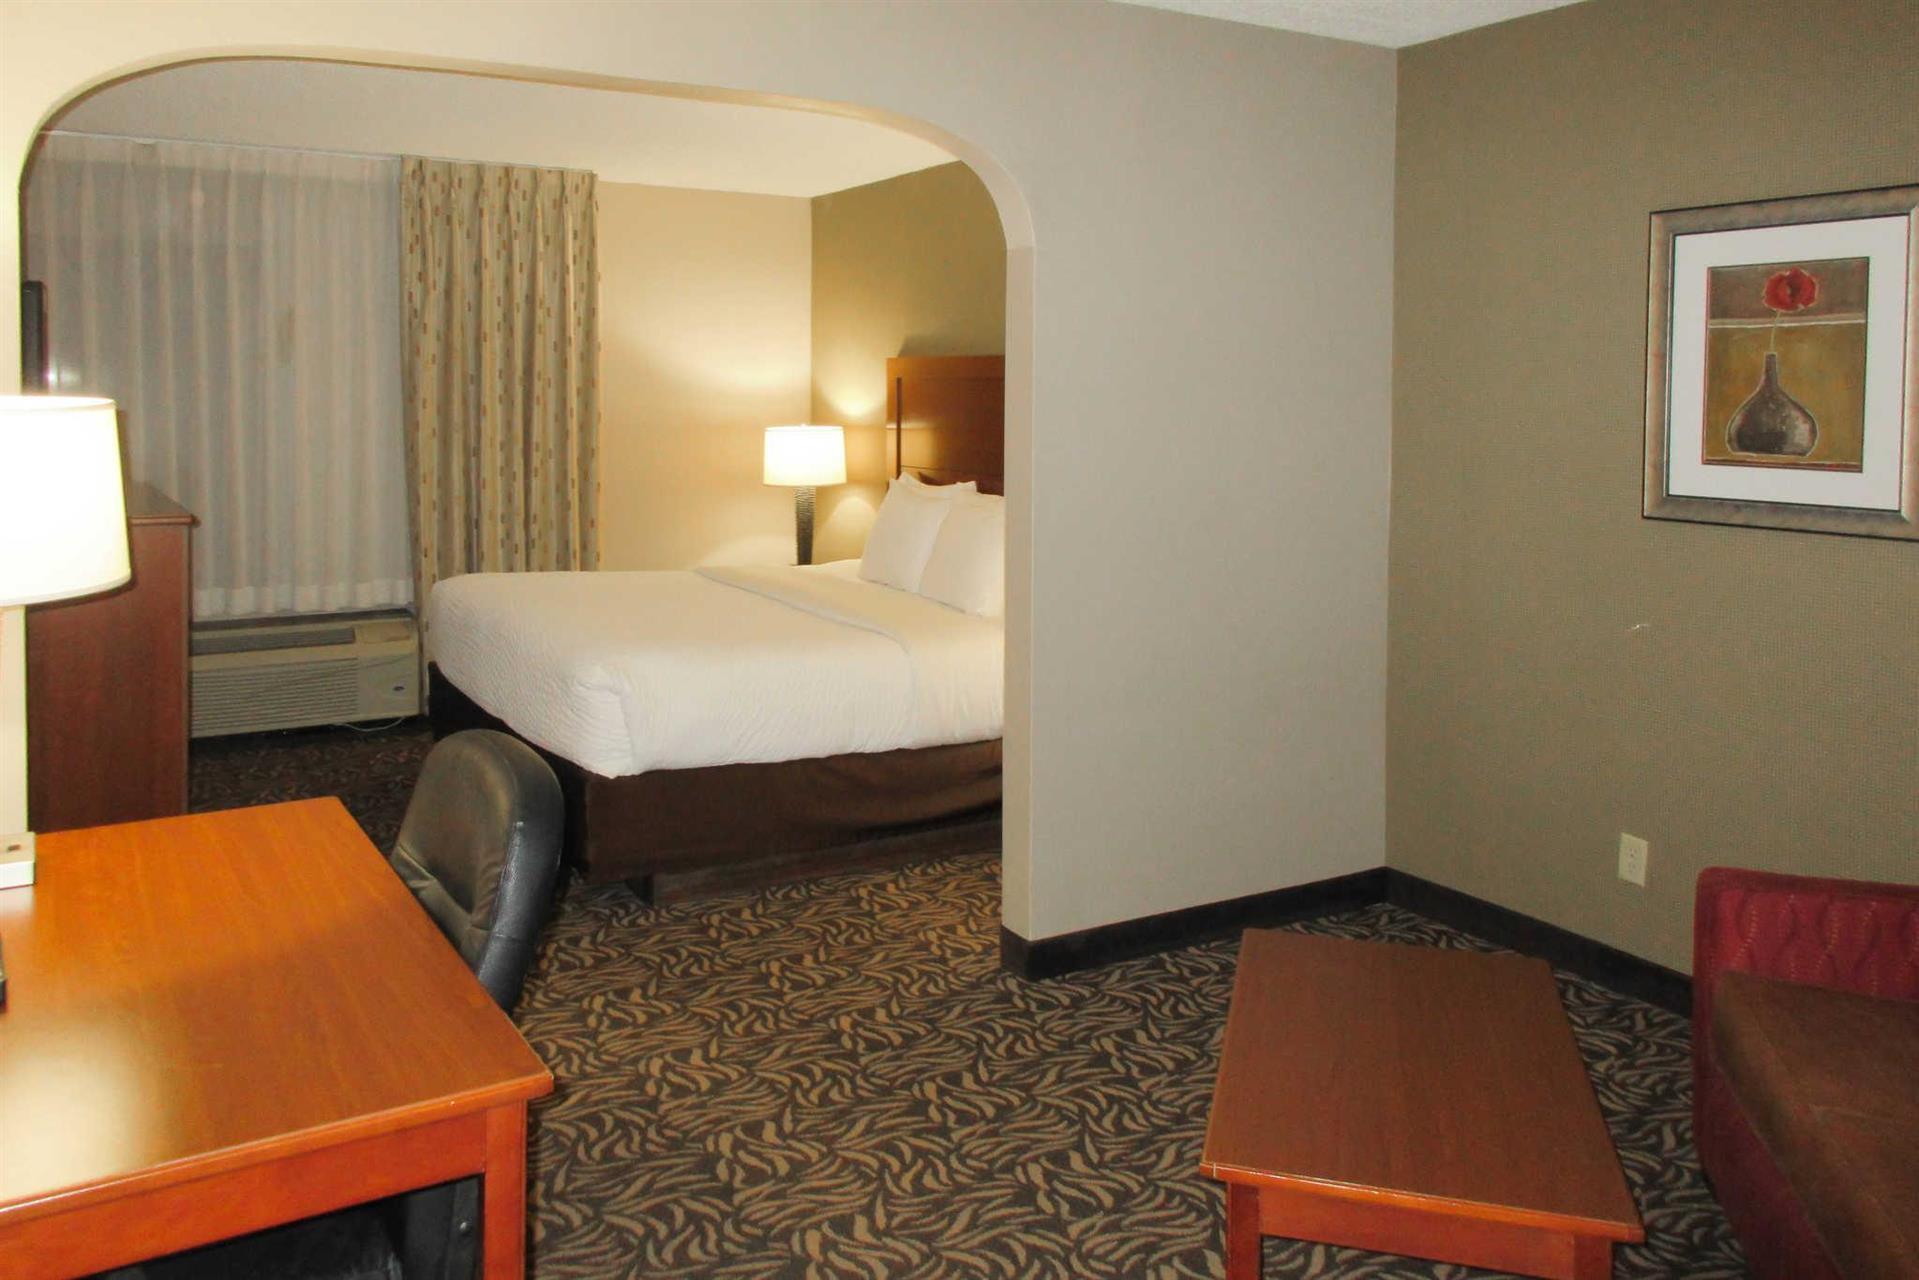 Clarion Inn & Suites - University Area in Cortland, NY